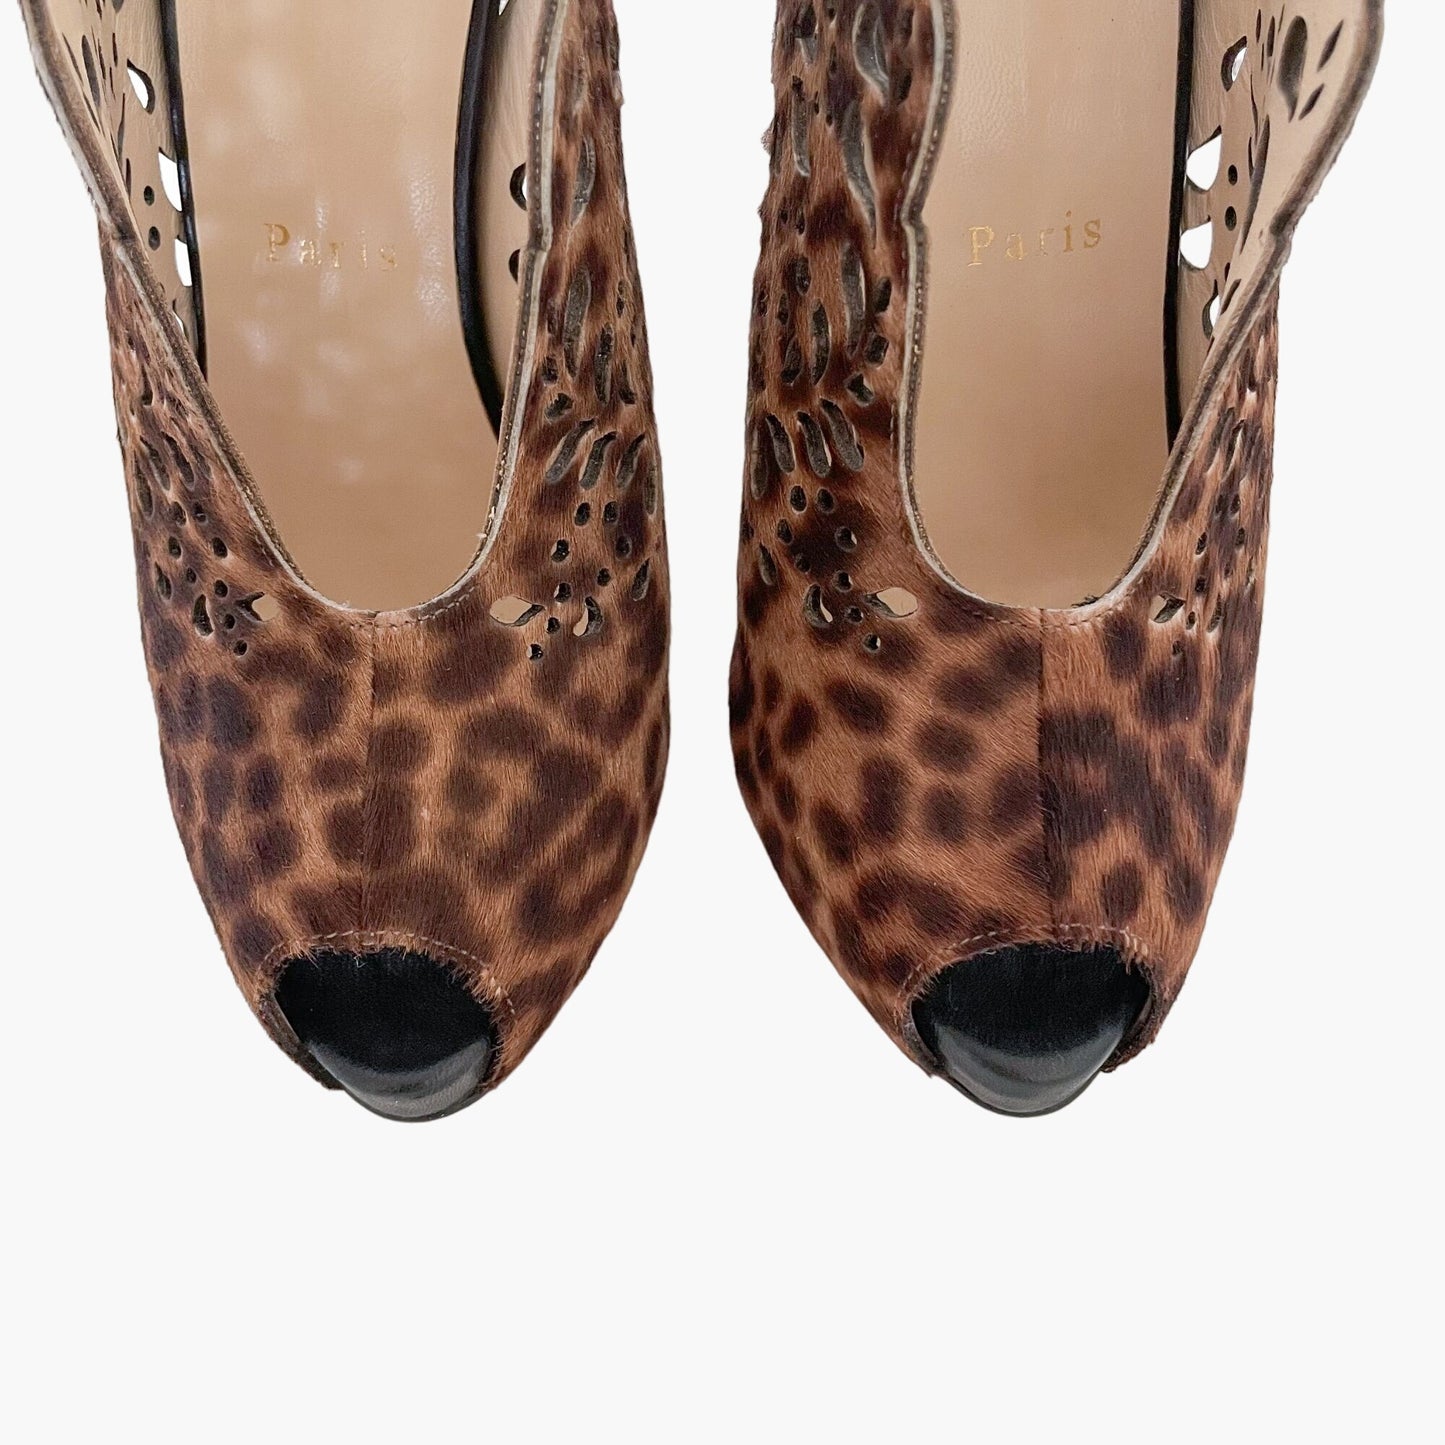 Christian Louboutin Markesling 120 Booties in Leopard Pony Hair Size 38